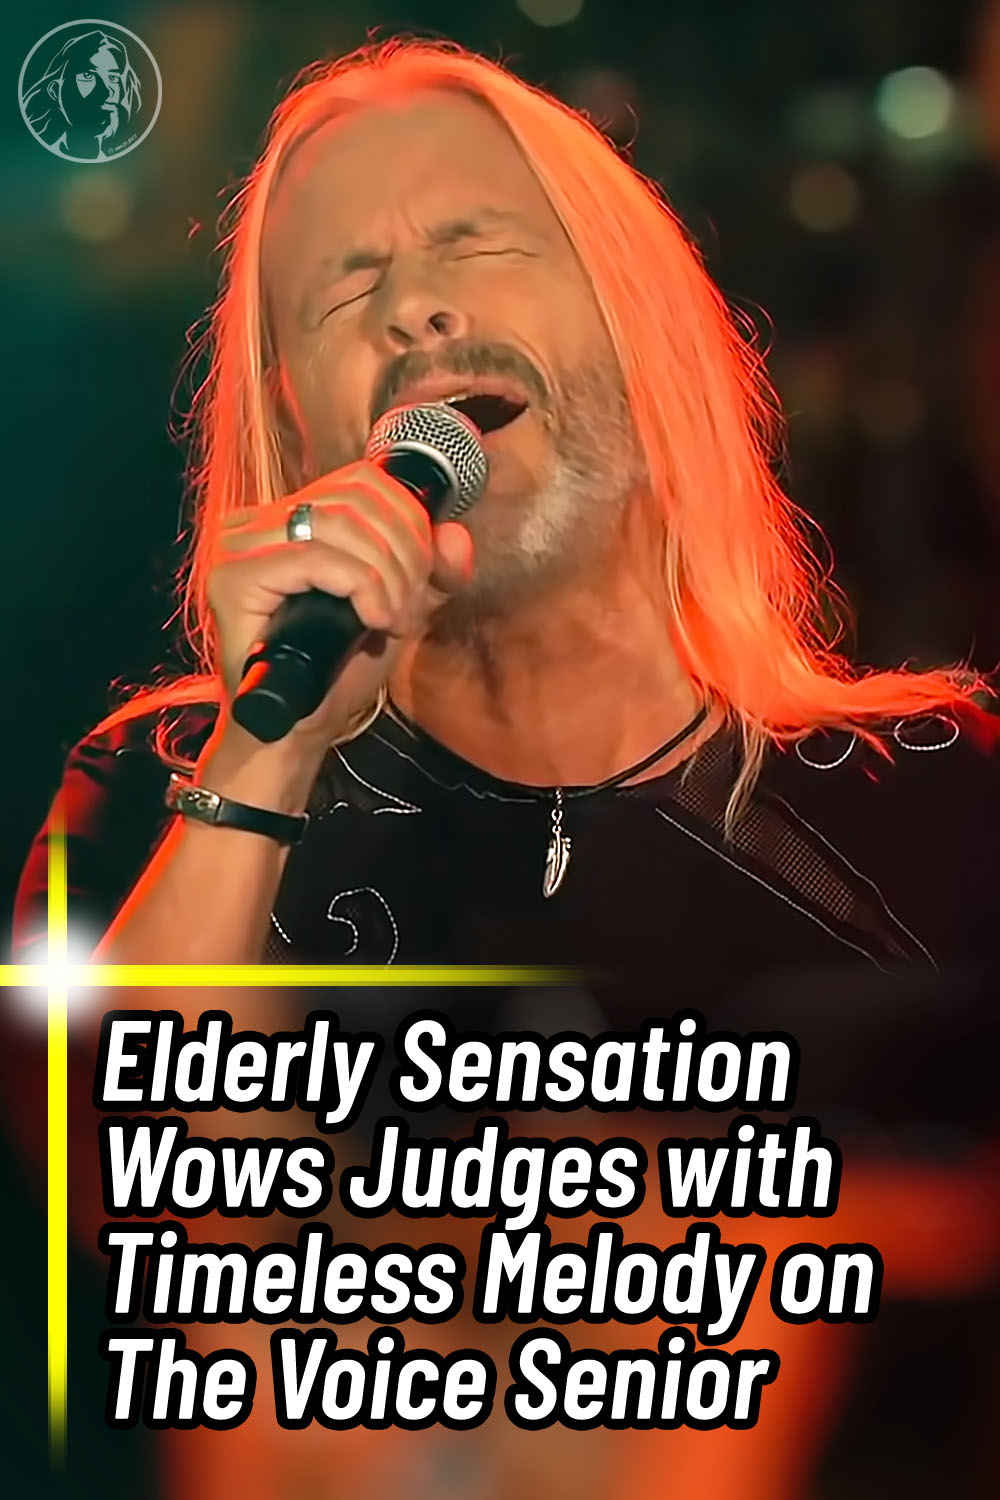 Elderly Sensation Wows Judges with Timeless Melody on The Voice Senior